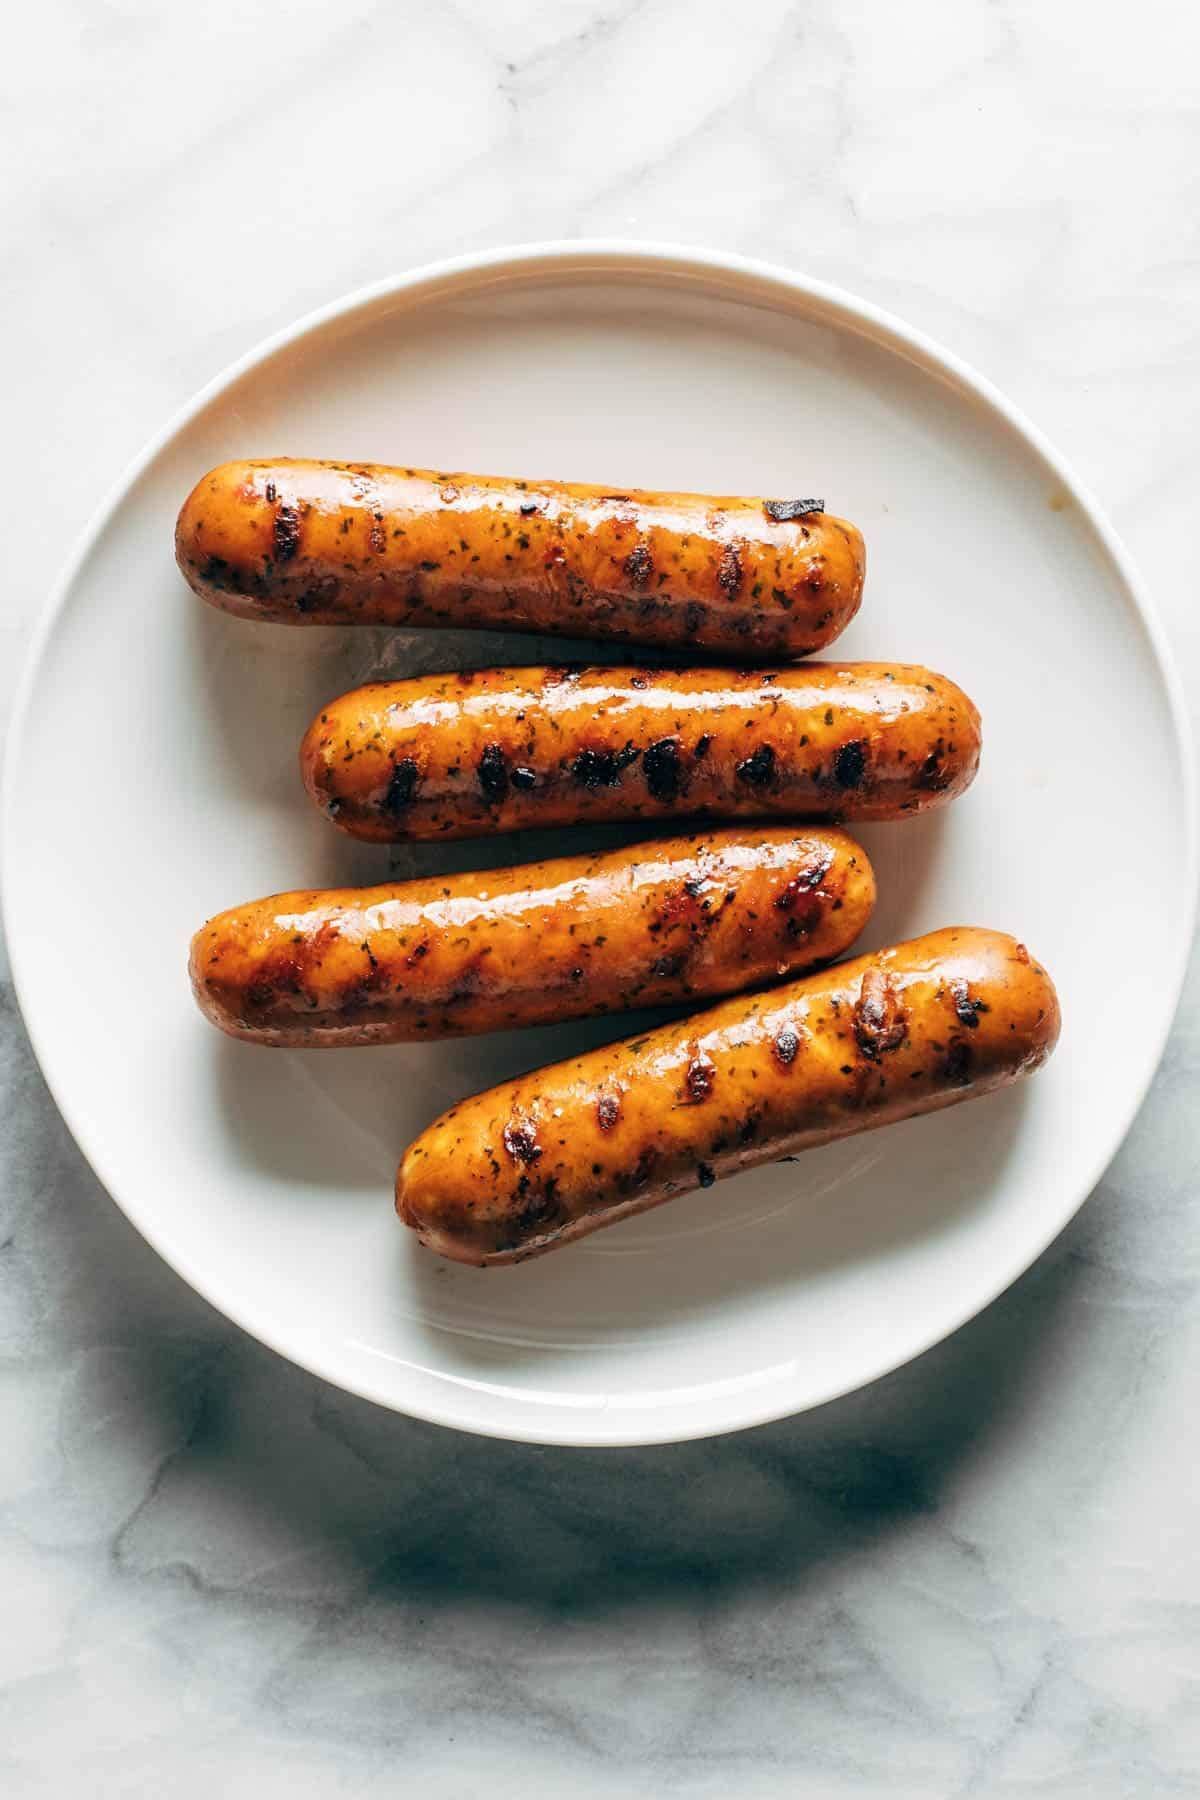 Grilled sausages on a plate.